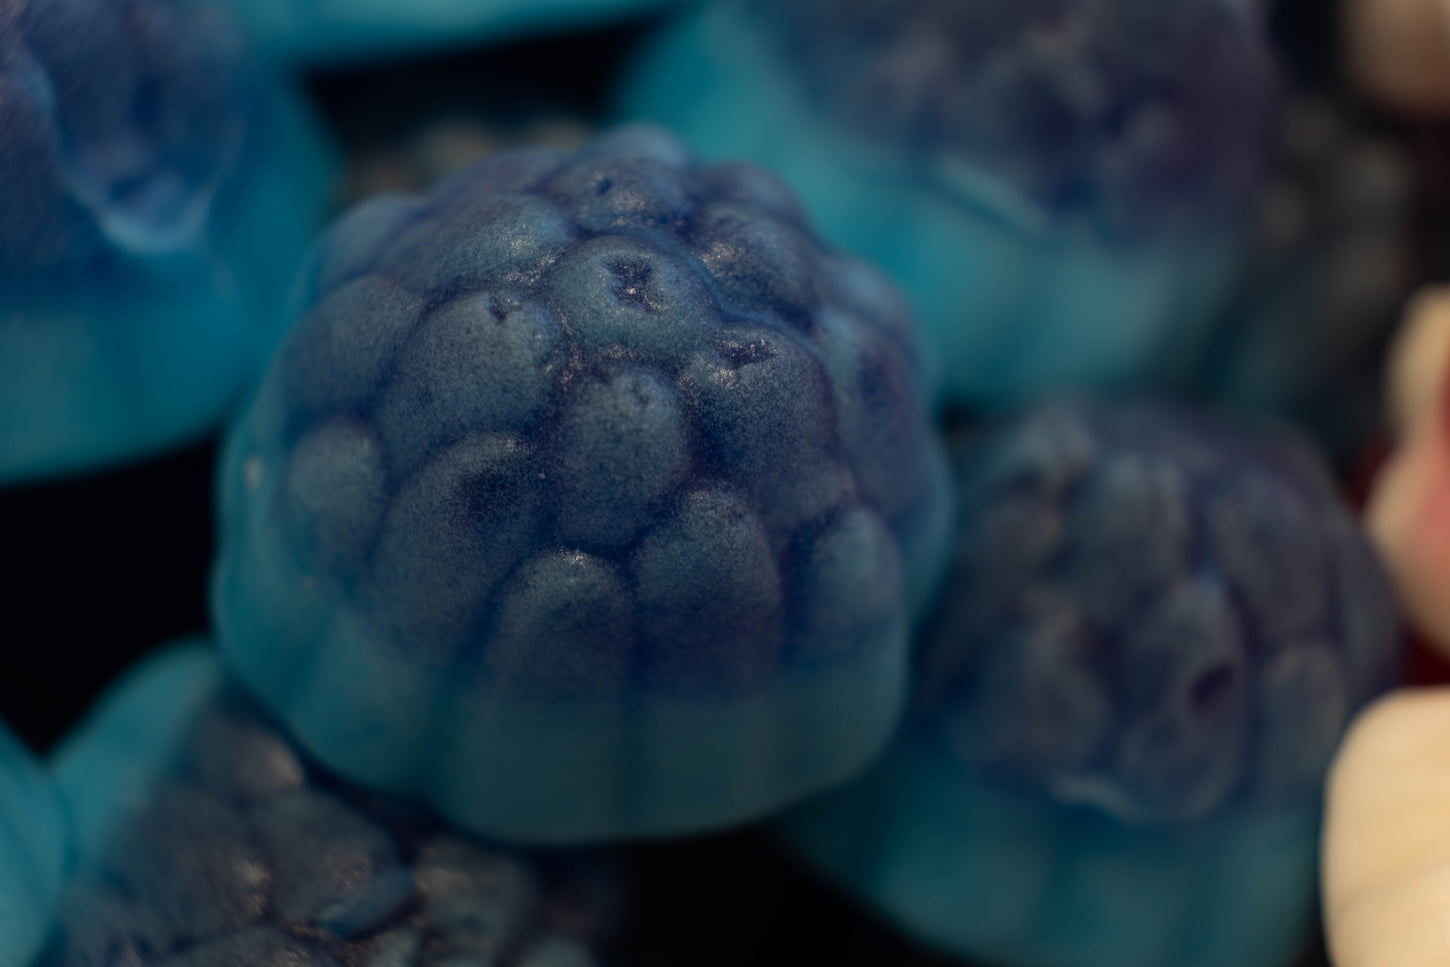 An image of a Jelly like a little blue raspberry in the candy shop.